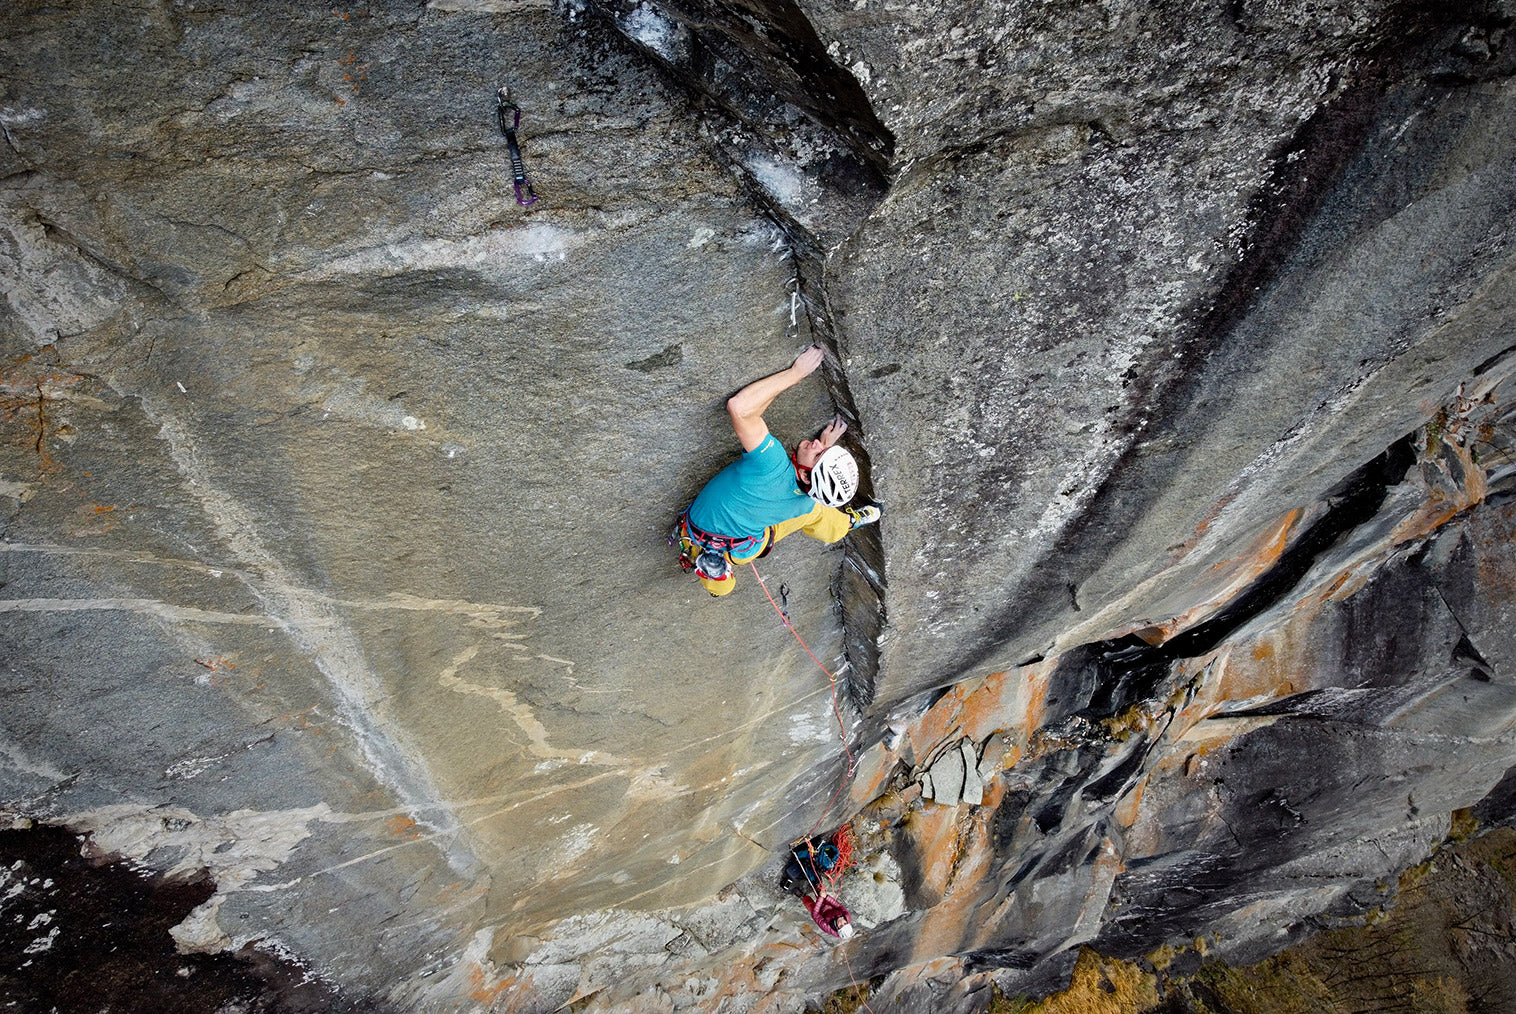 Christopher Igel on the mini-dihedral of the crux sixth pitch